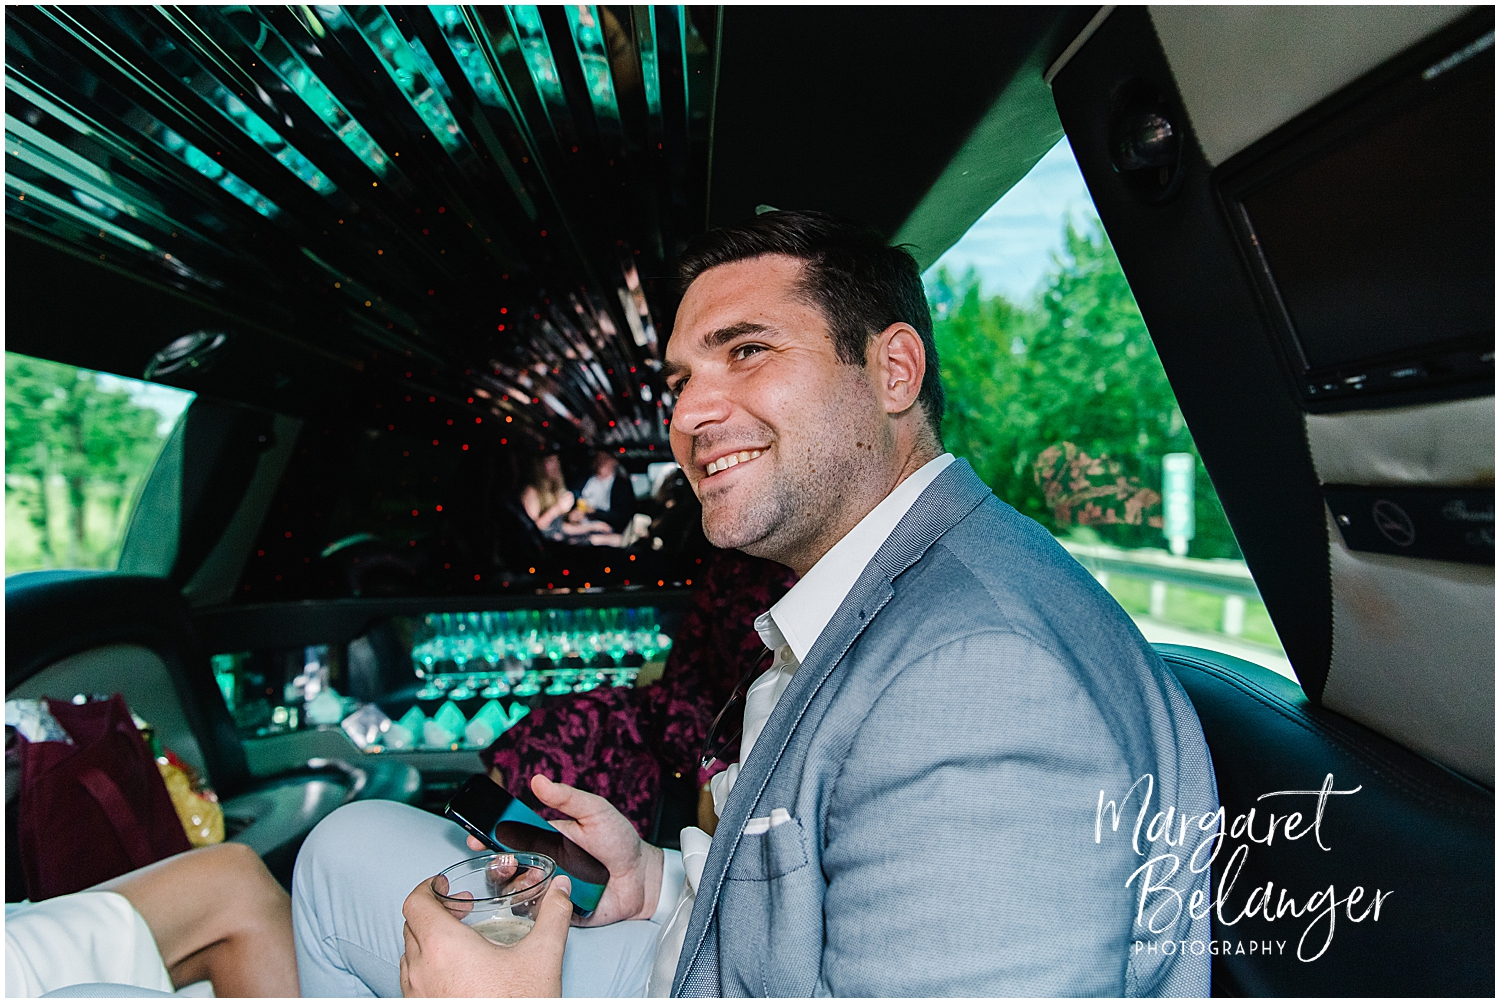 A man in a grey suit smiling inside a limousine with colorful lights on the ceiling.